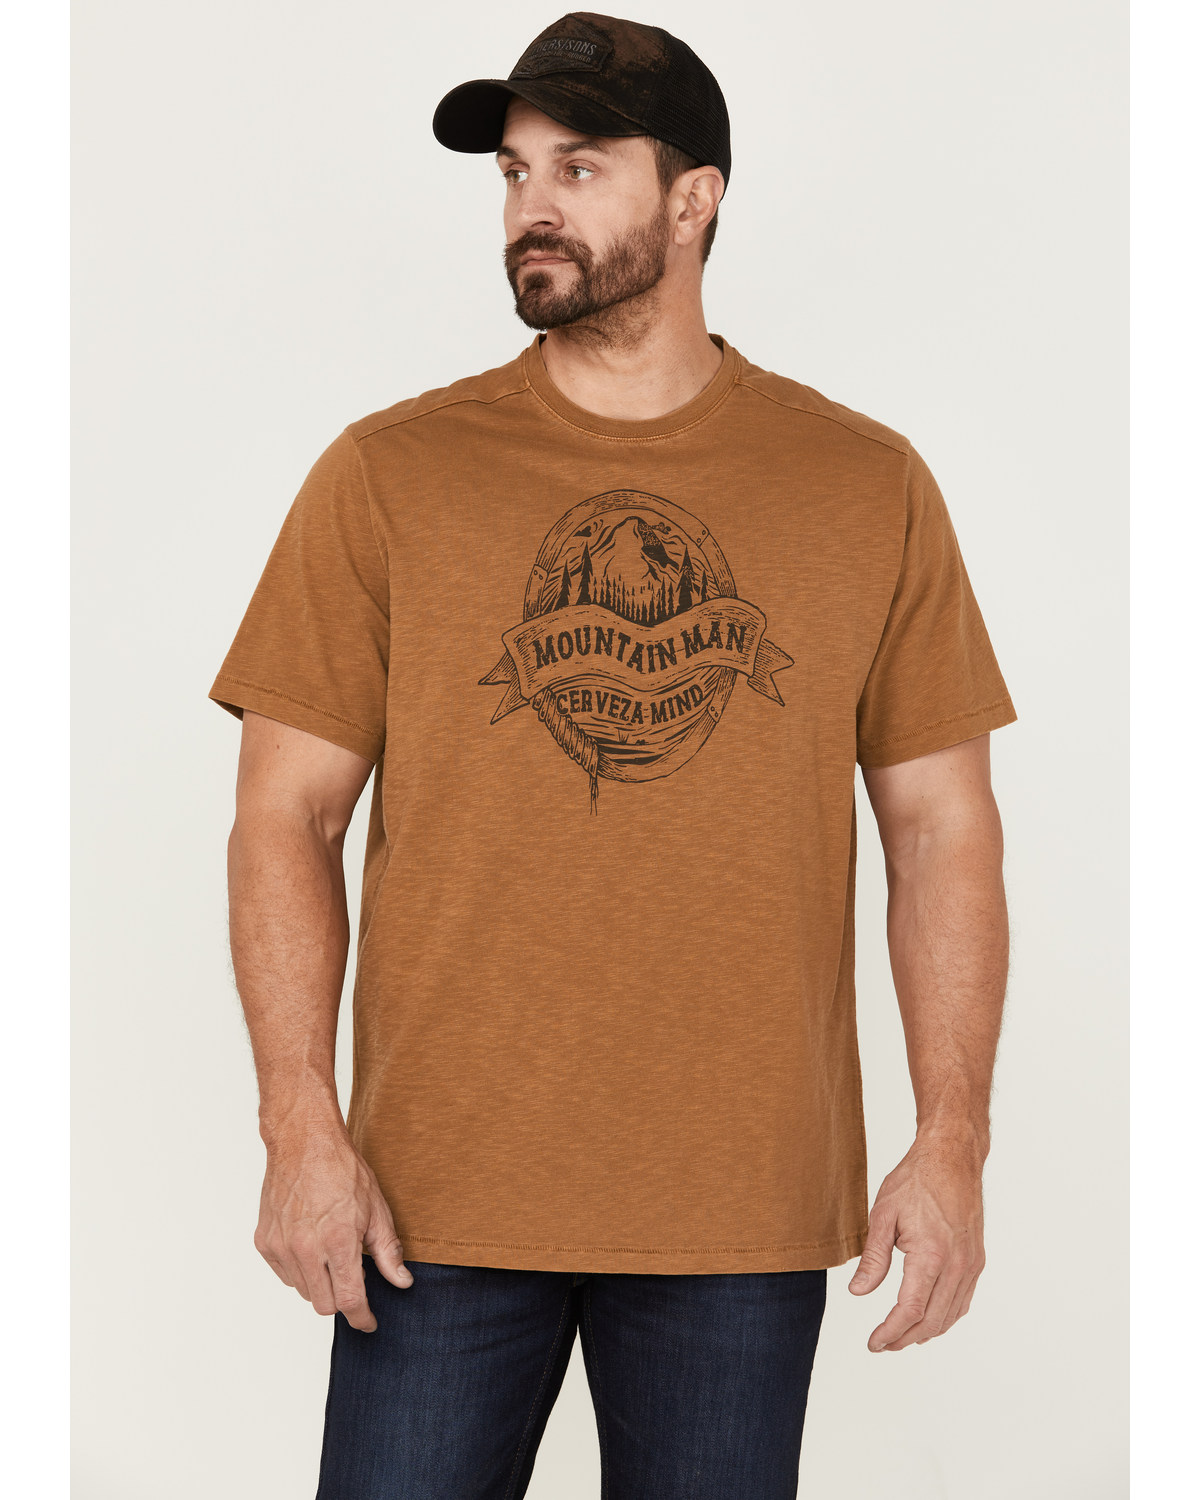 Brothers and Sons Men's Rocky Mountain High Graphic Short Sleeve T-Shirt